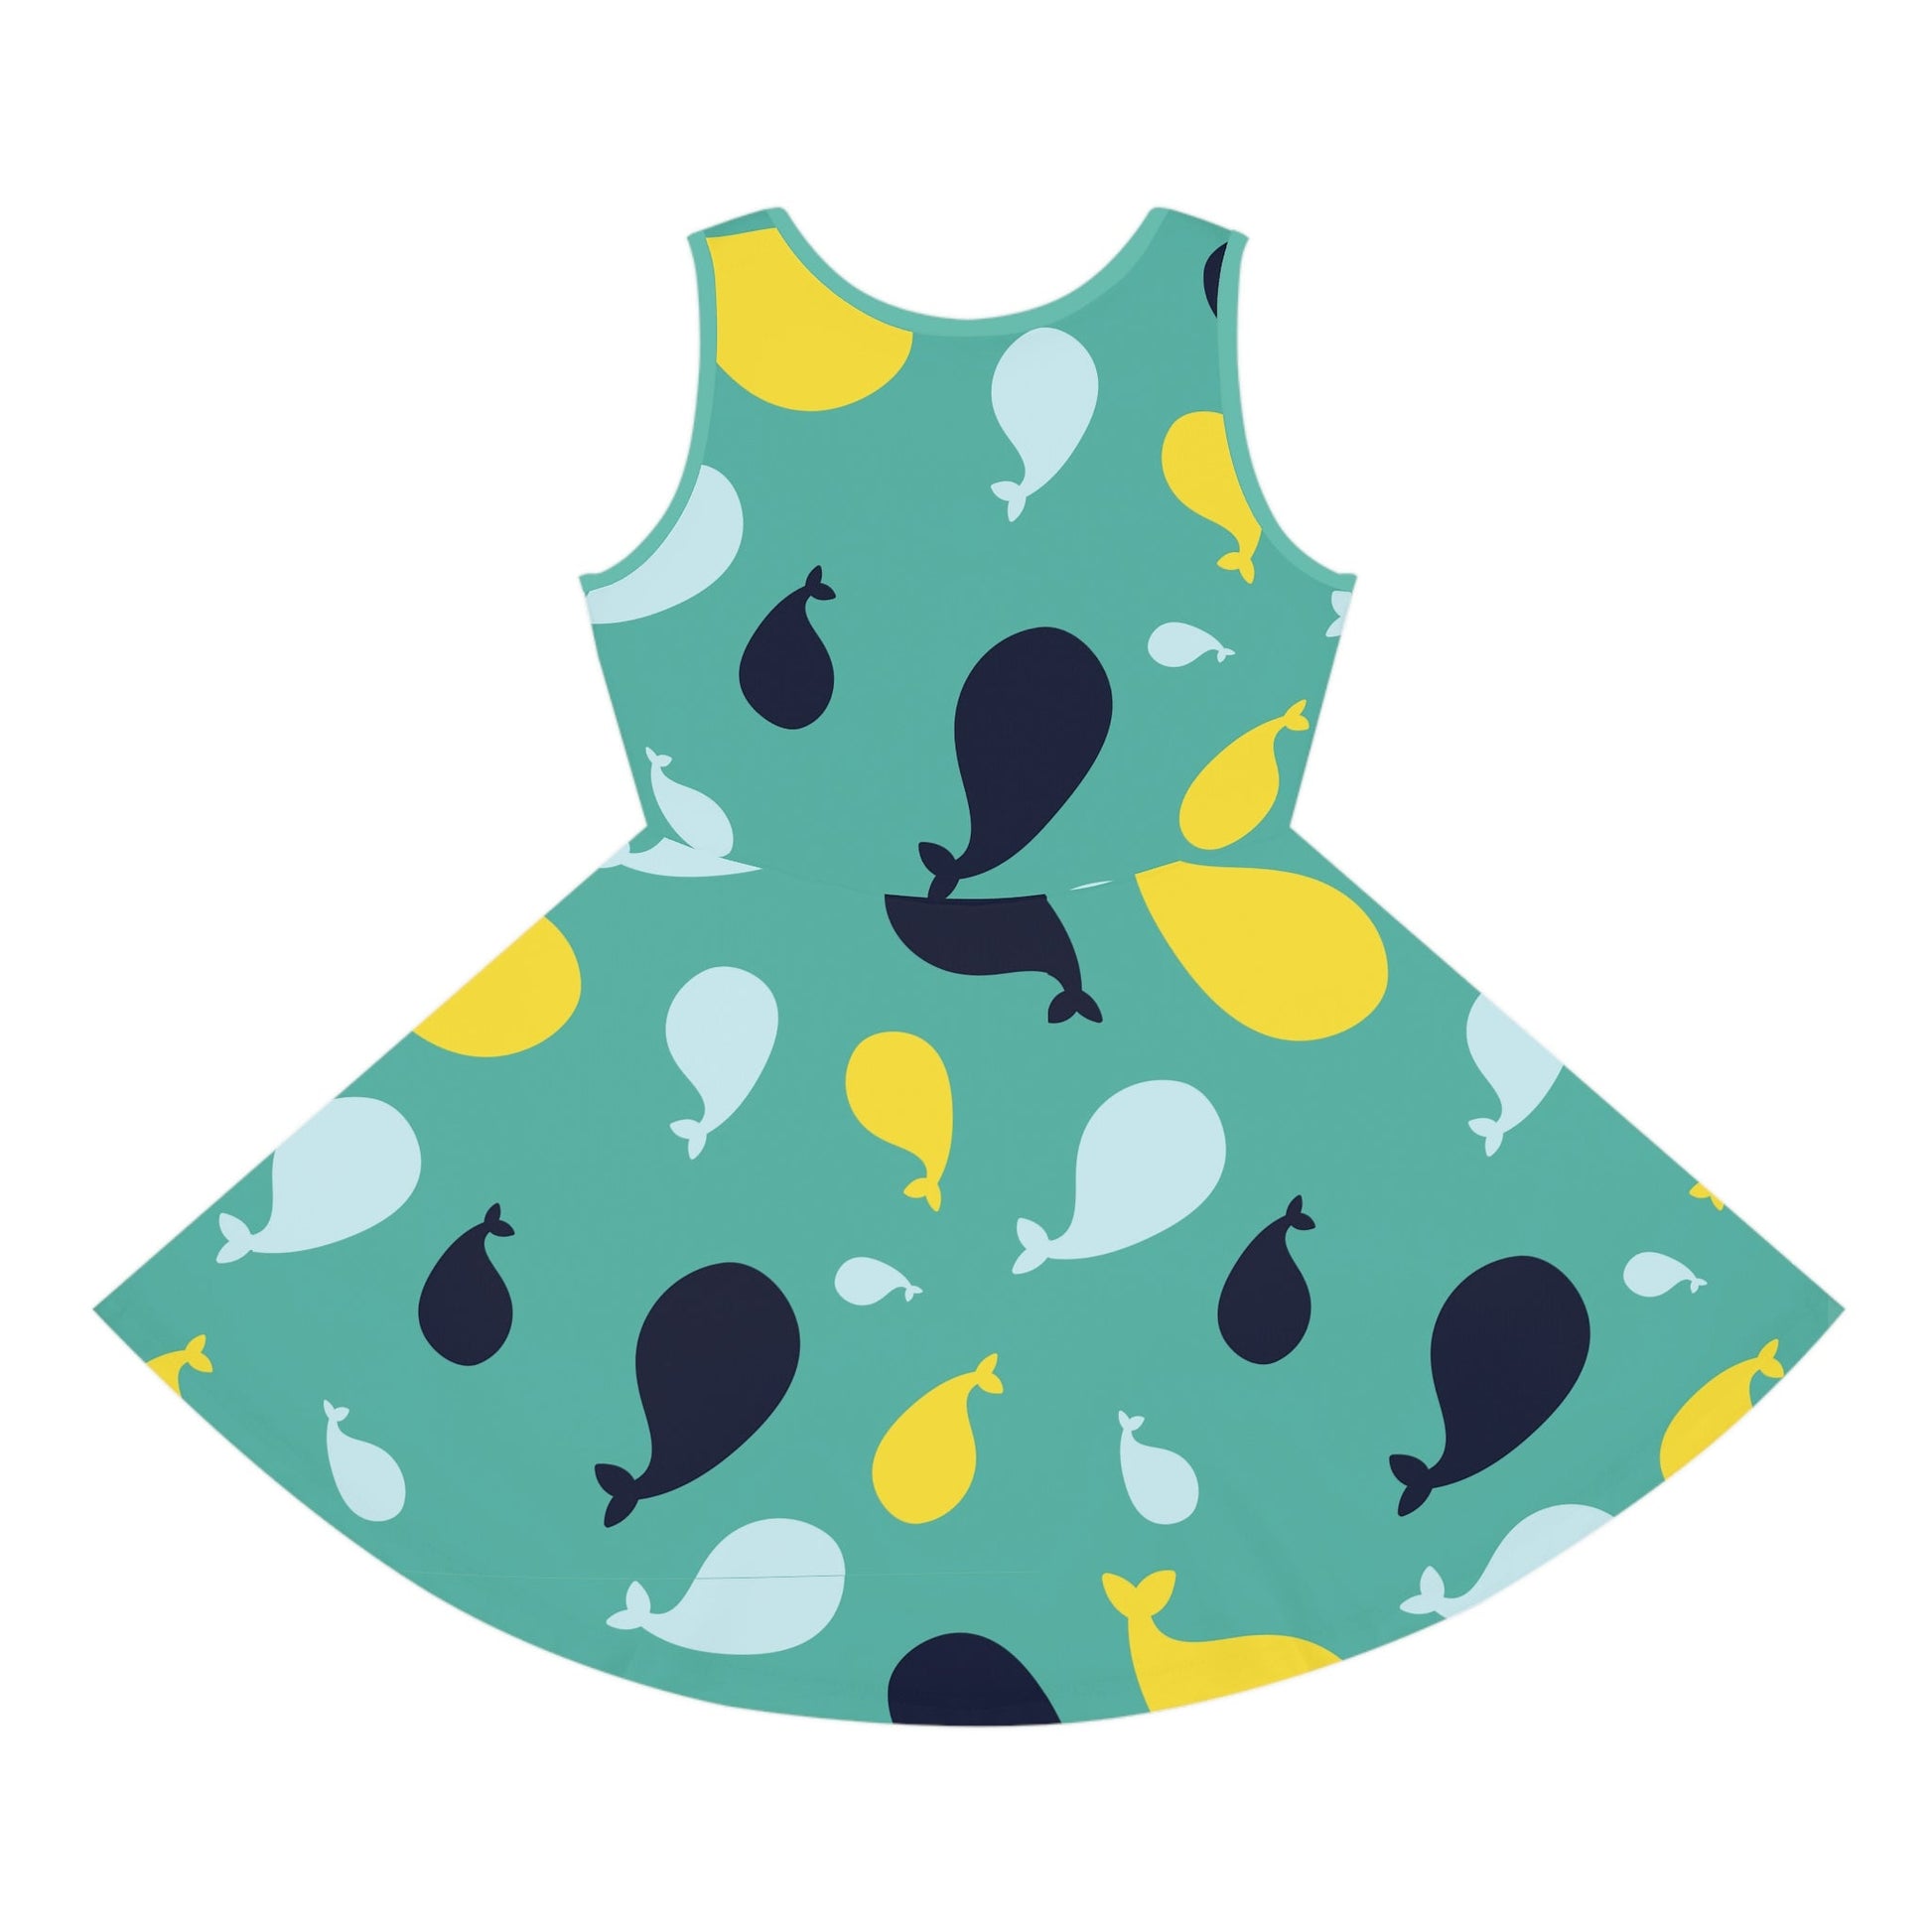 Coco Girls' Sleeveless Sundress All Over PrintAOPAOP Clothing#tag4##tag5##tag6#